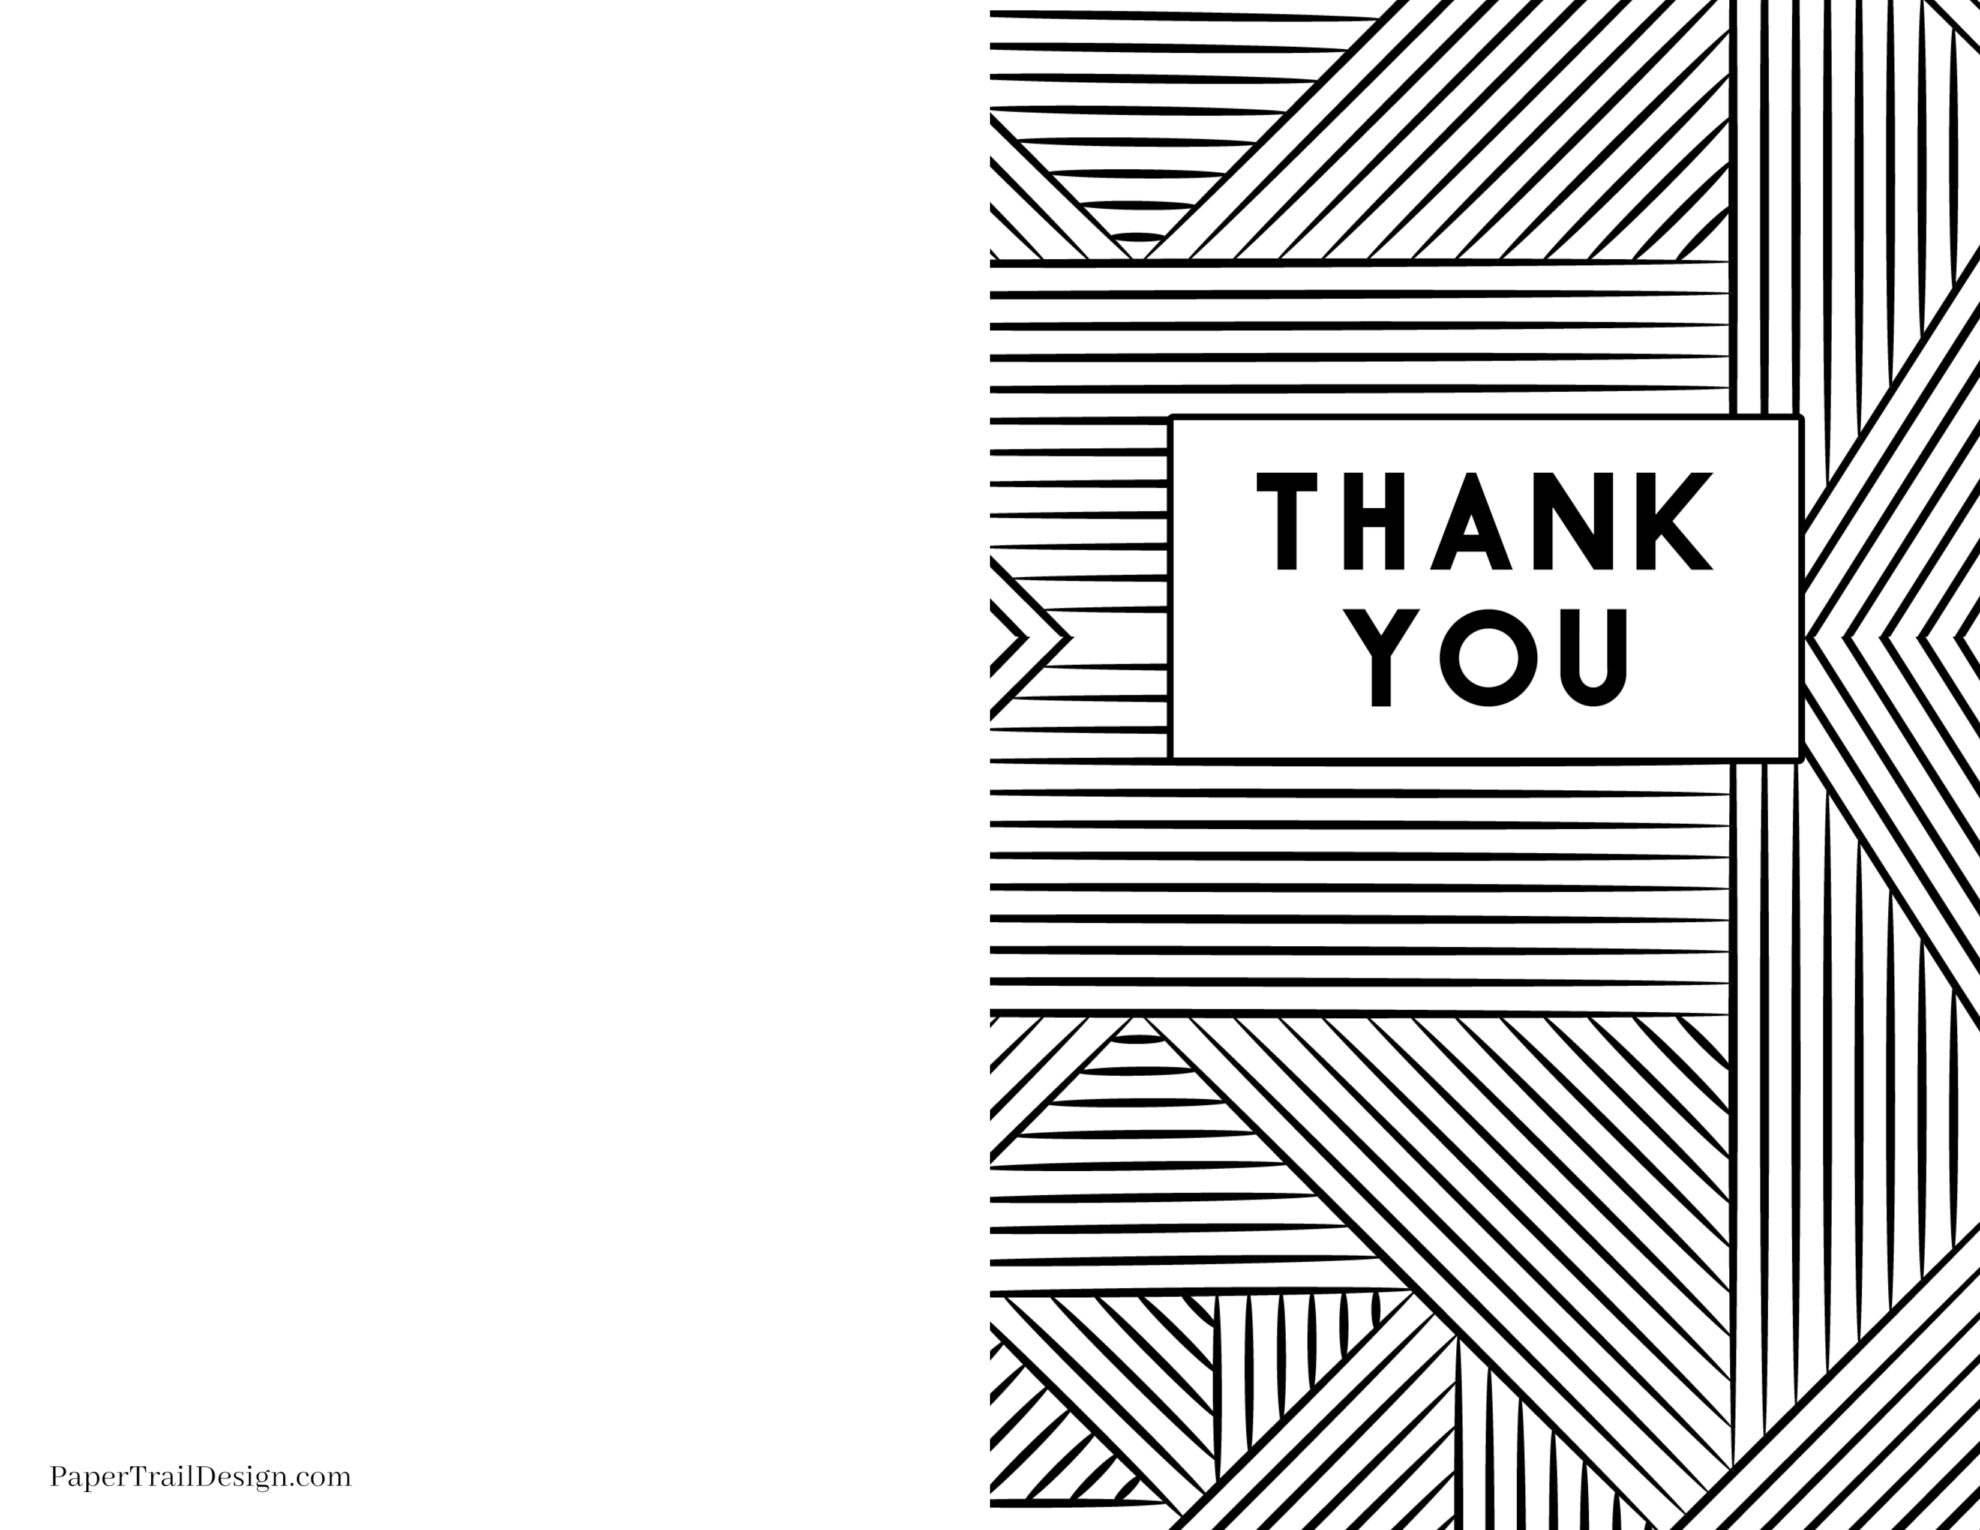 Free Printable Thank You Cards - Paper Trail Design For Free Printable Thank You Card Template